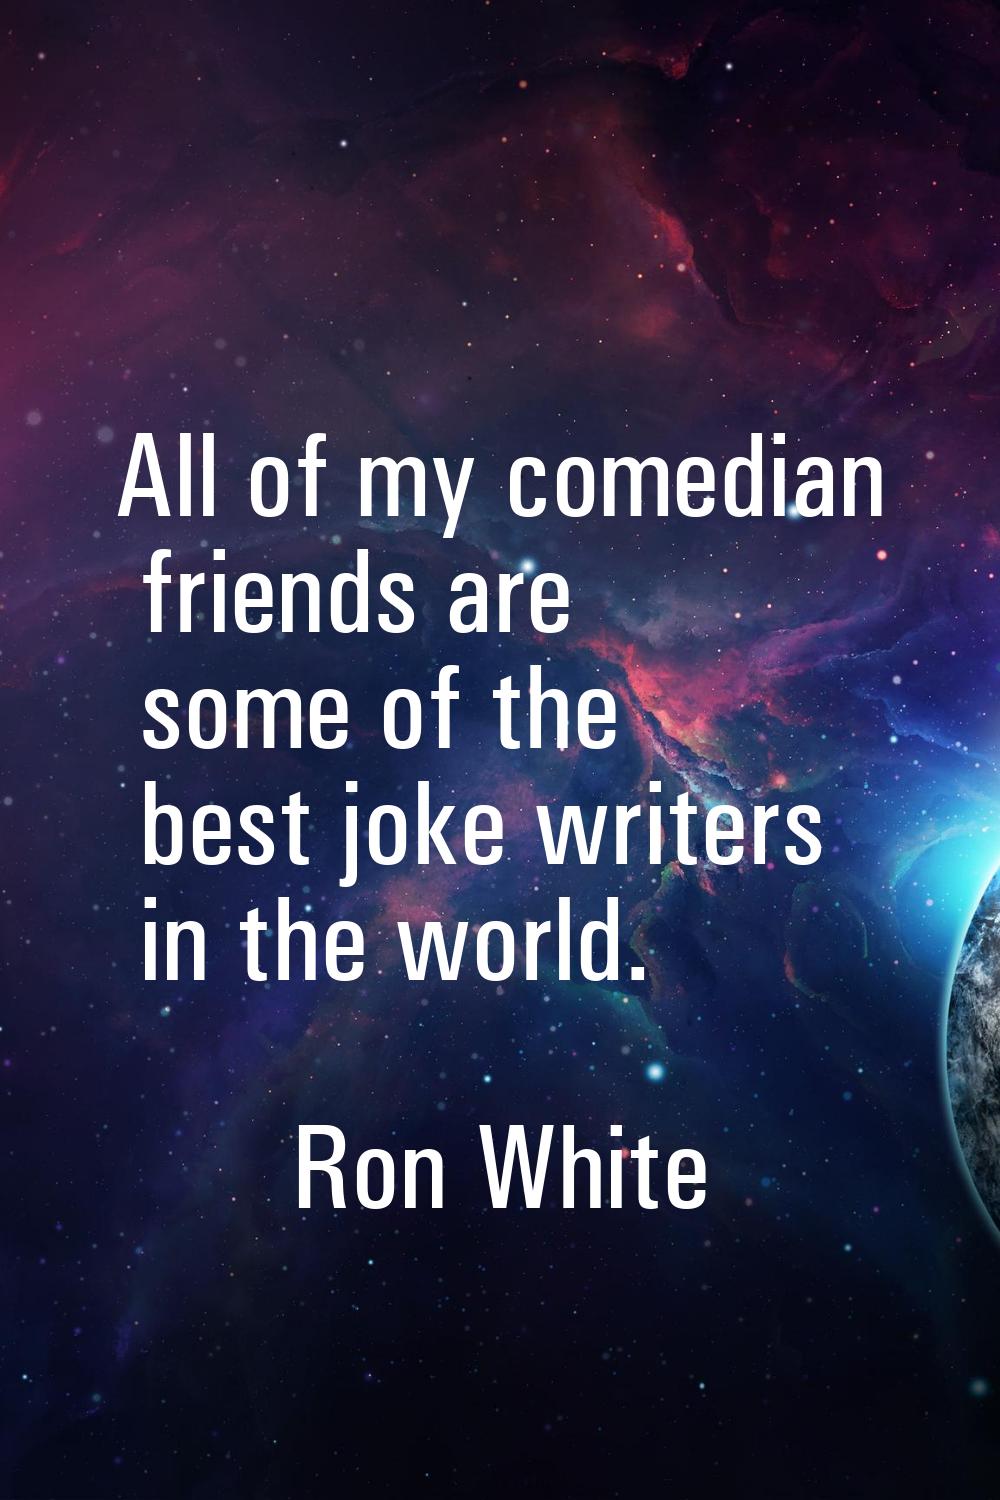 All of my comedian friends are some of the best joke writers in the world.